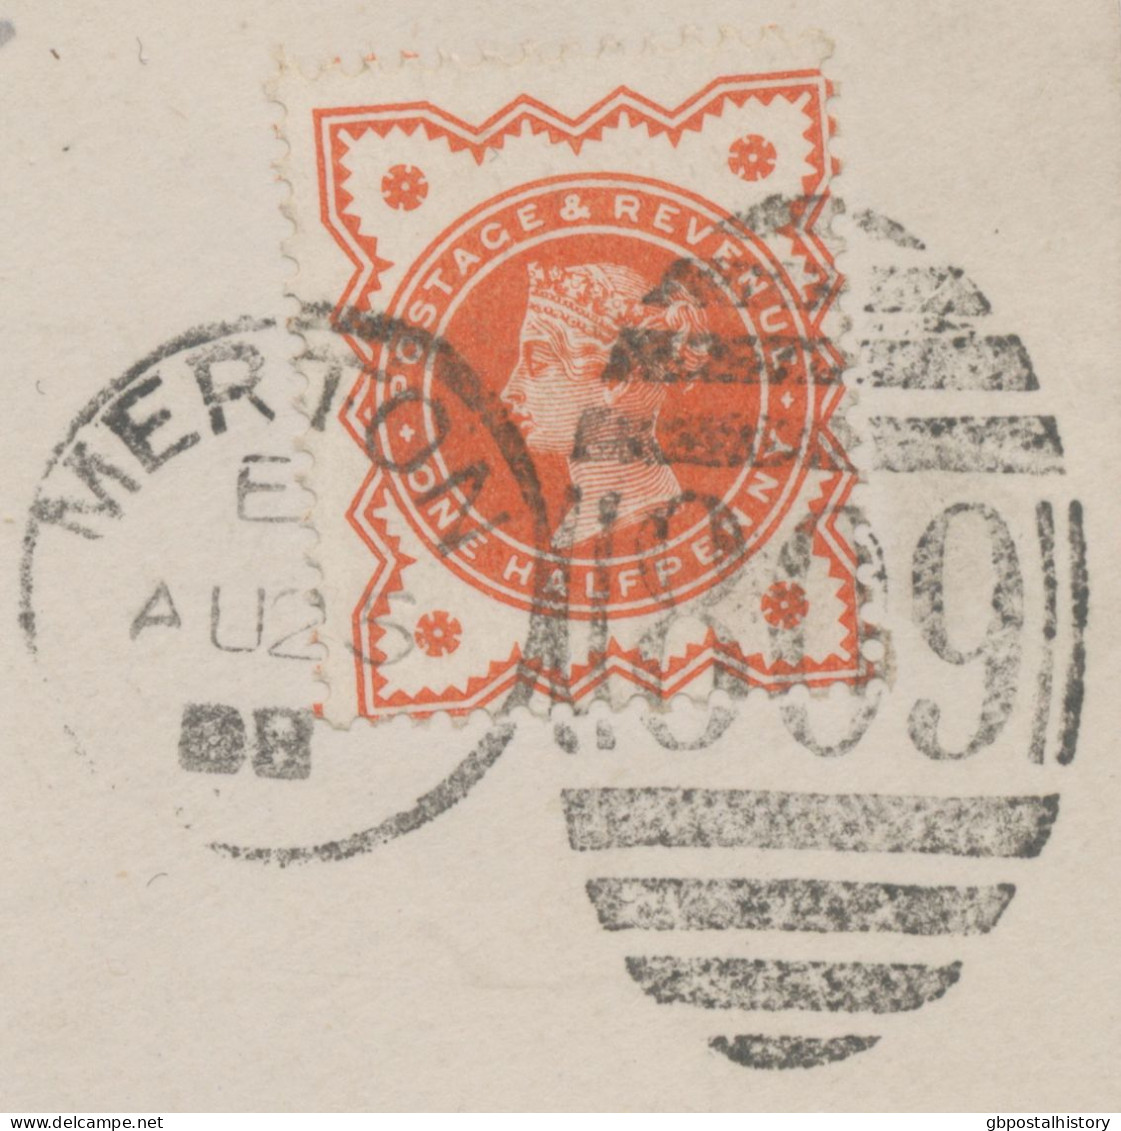 GB 1888 QV Jubilee ½d Vermilion On VF Cover With Barred Duplex-cancel "MERTON / 809" (Merton, Surrey) RARE POSTAGE RATE - Covers & Documents